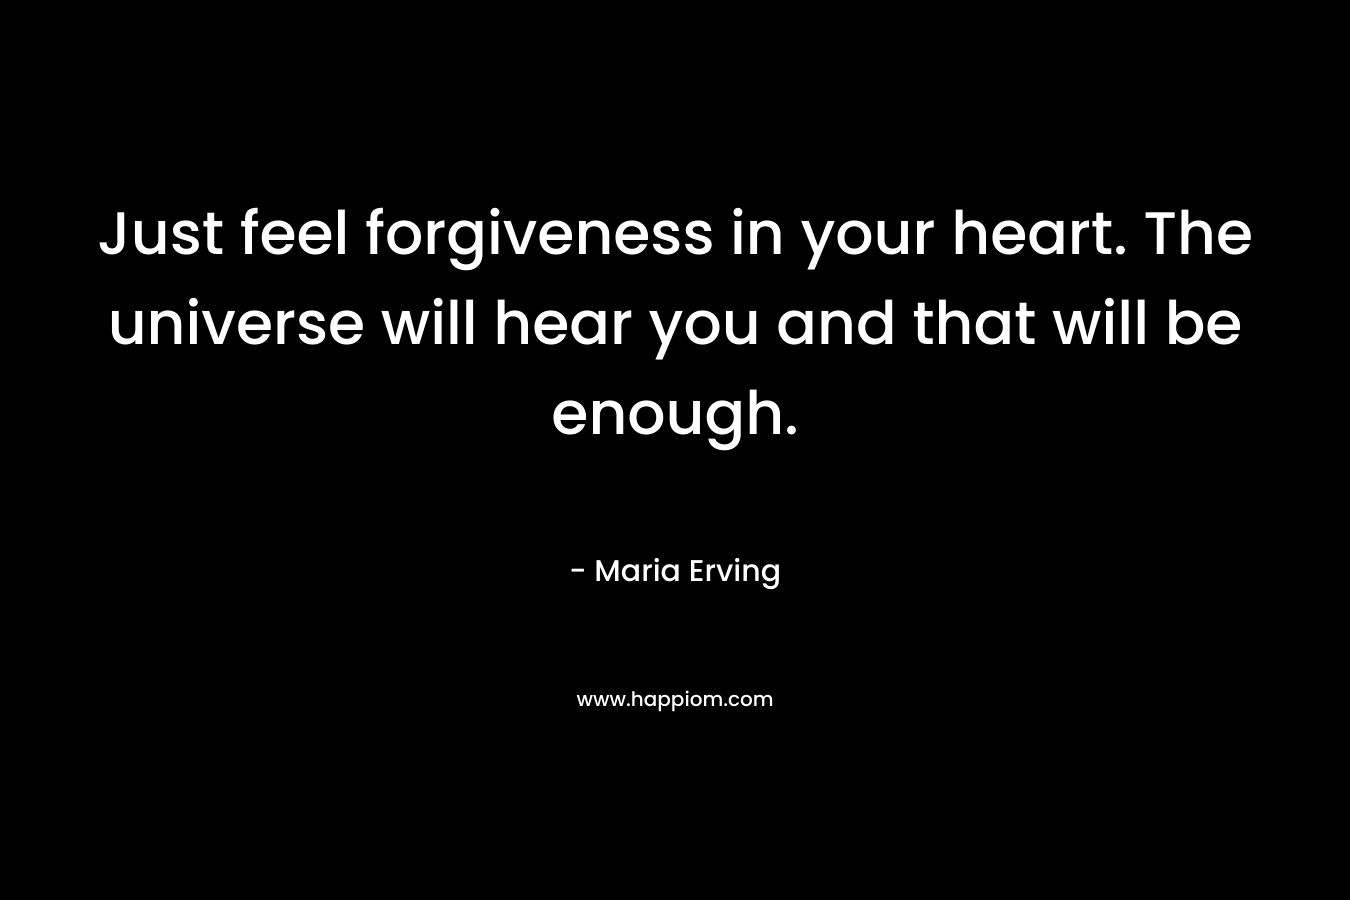 Just feel forgiveness in your heart. The universe will hear you and that will be enough.